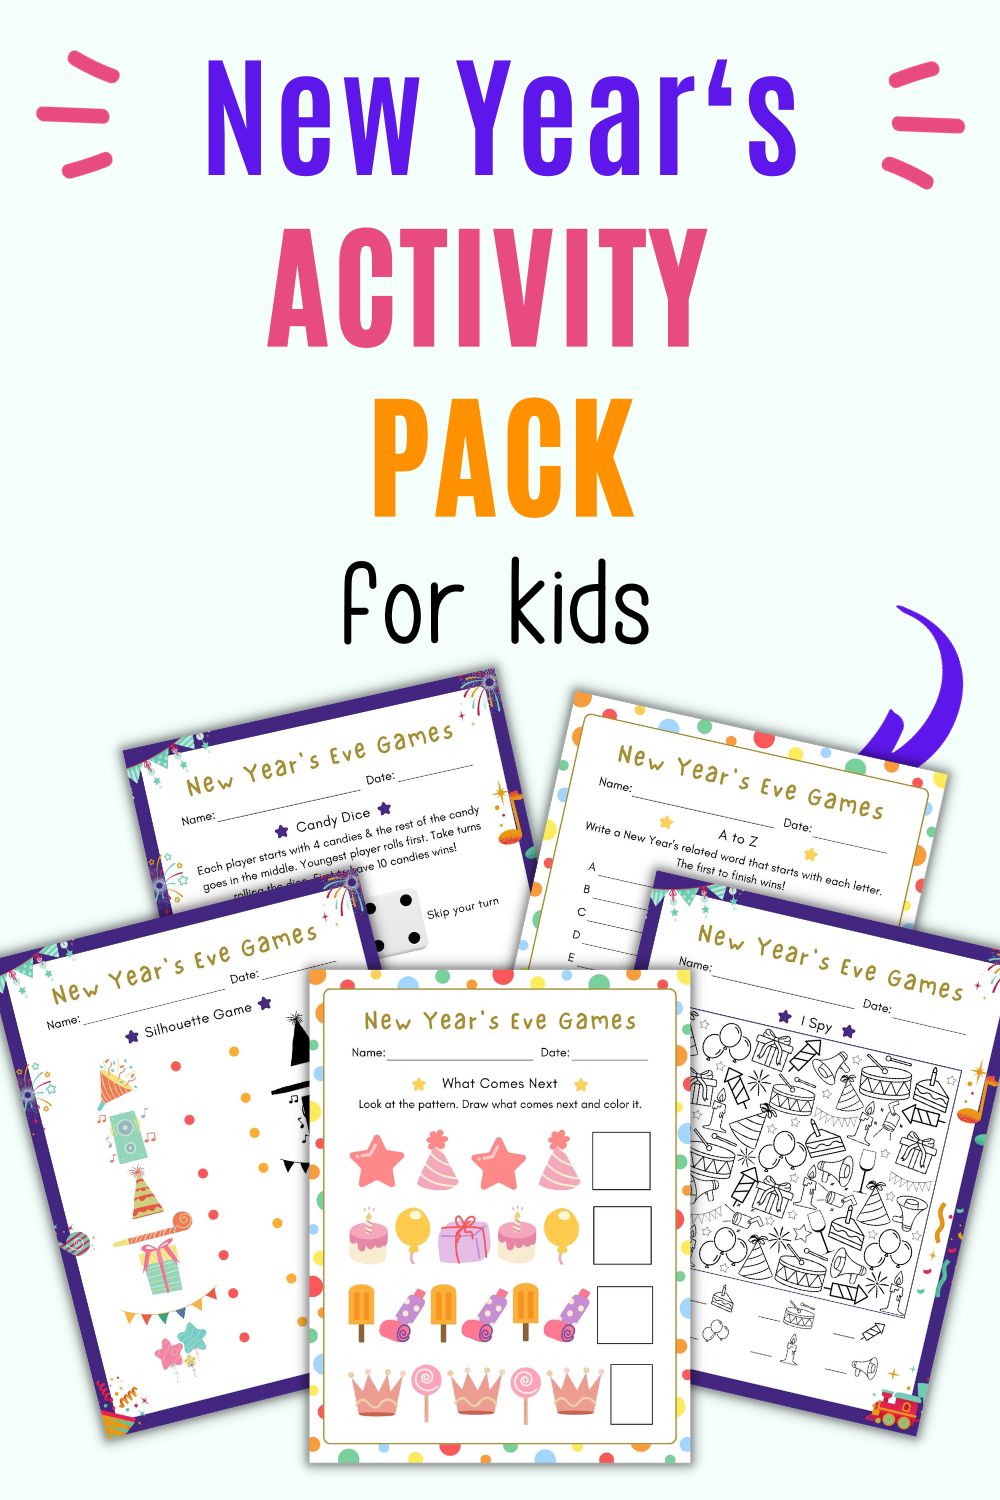 Text "New Year's activity pack for kids" with a preview of five pages of games